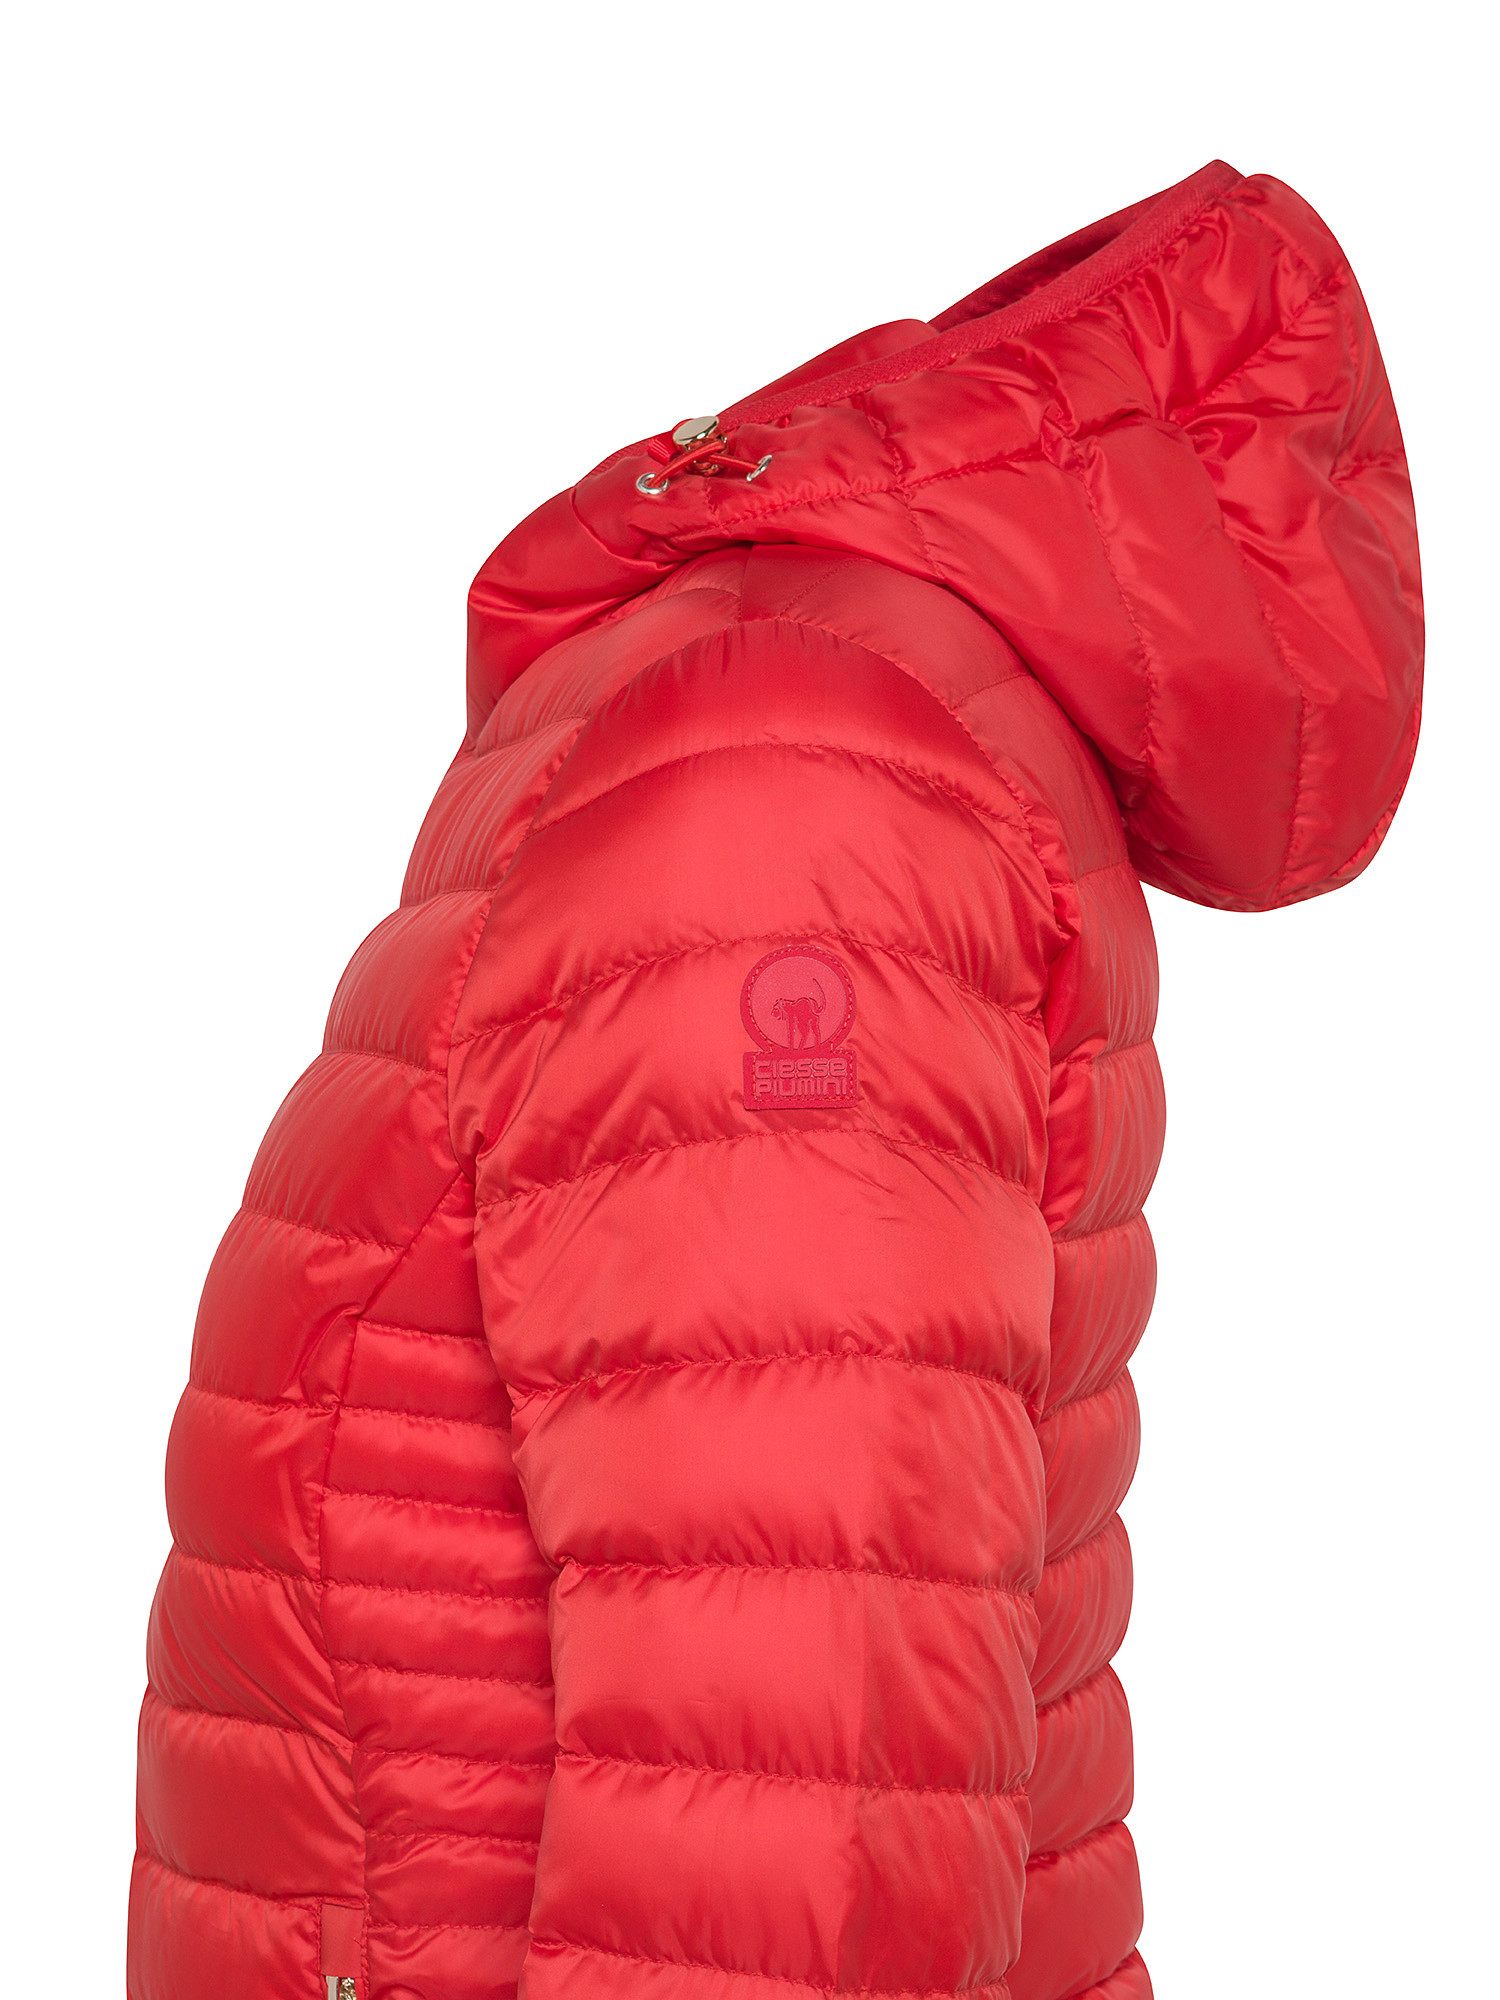 Ciesse Piumini - Carrie down jacket with hood, Red, large image number 2